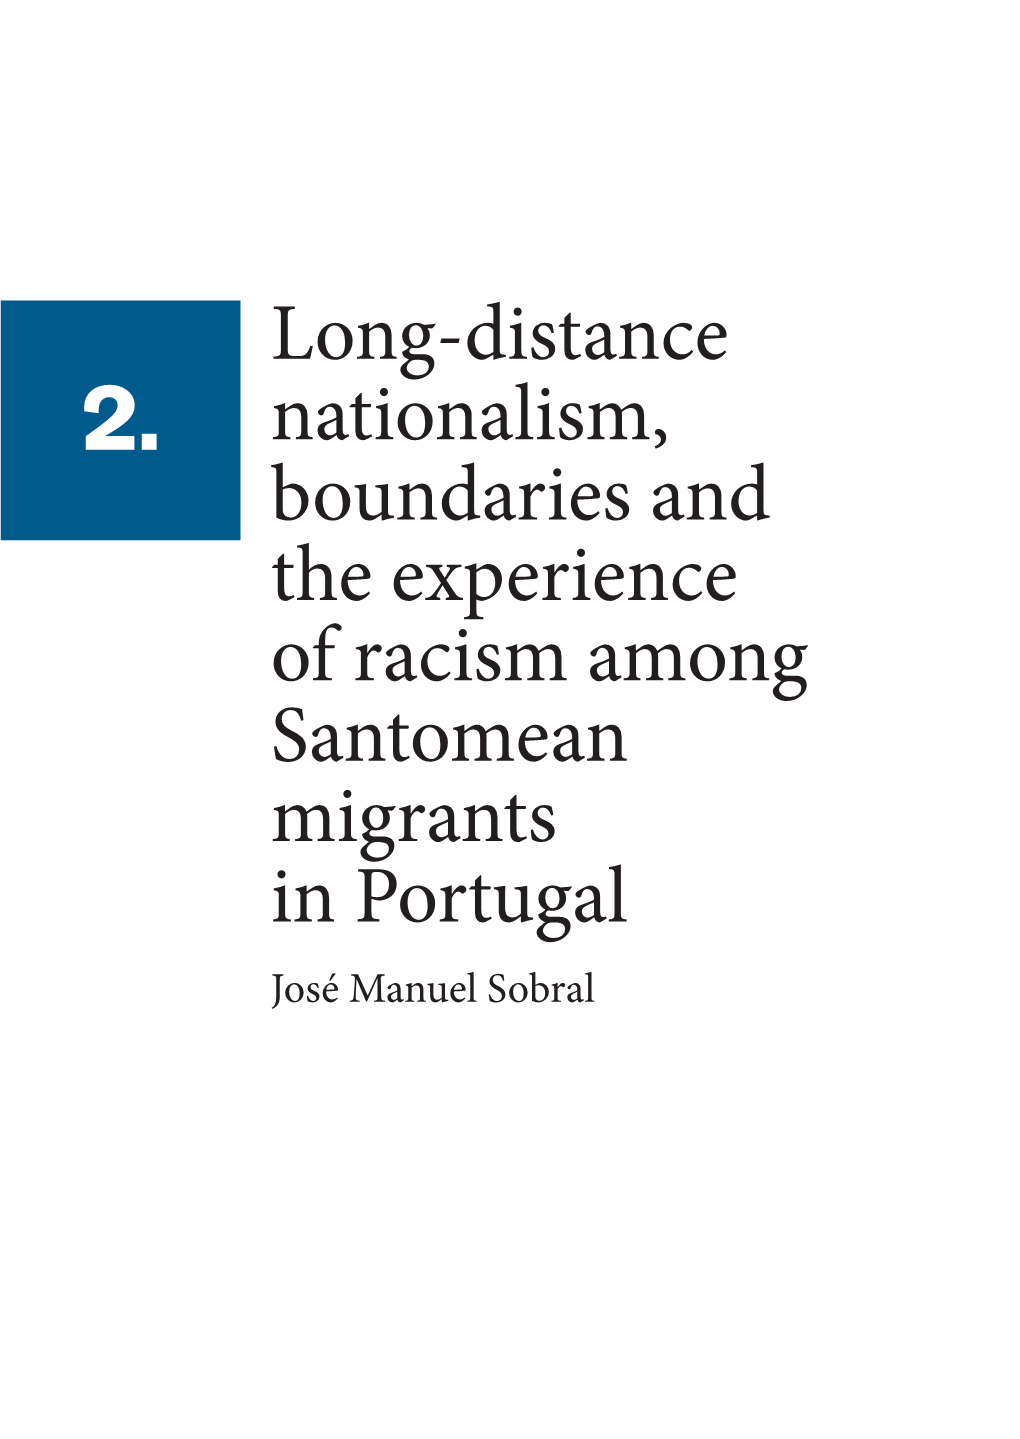 Long-Distance Nationalism, Boundaries and the Experience of Racism 51